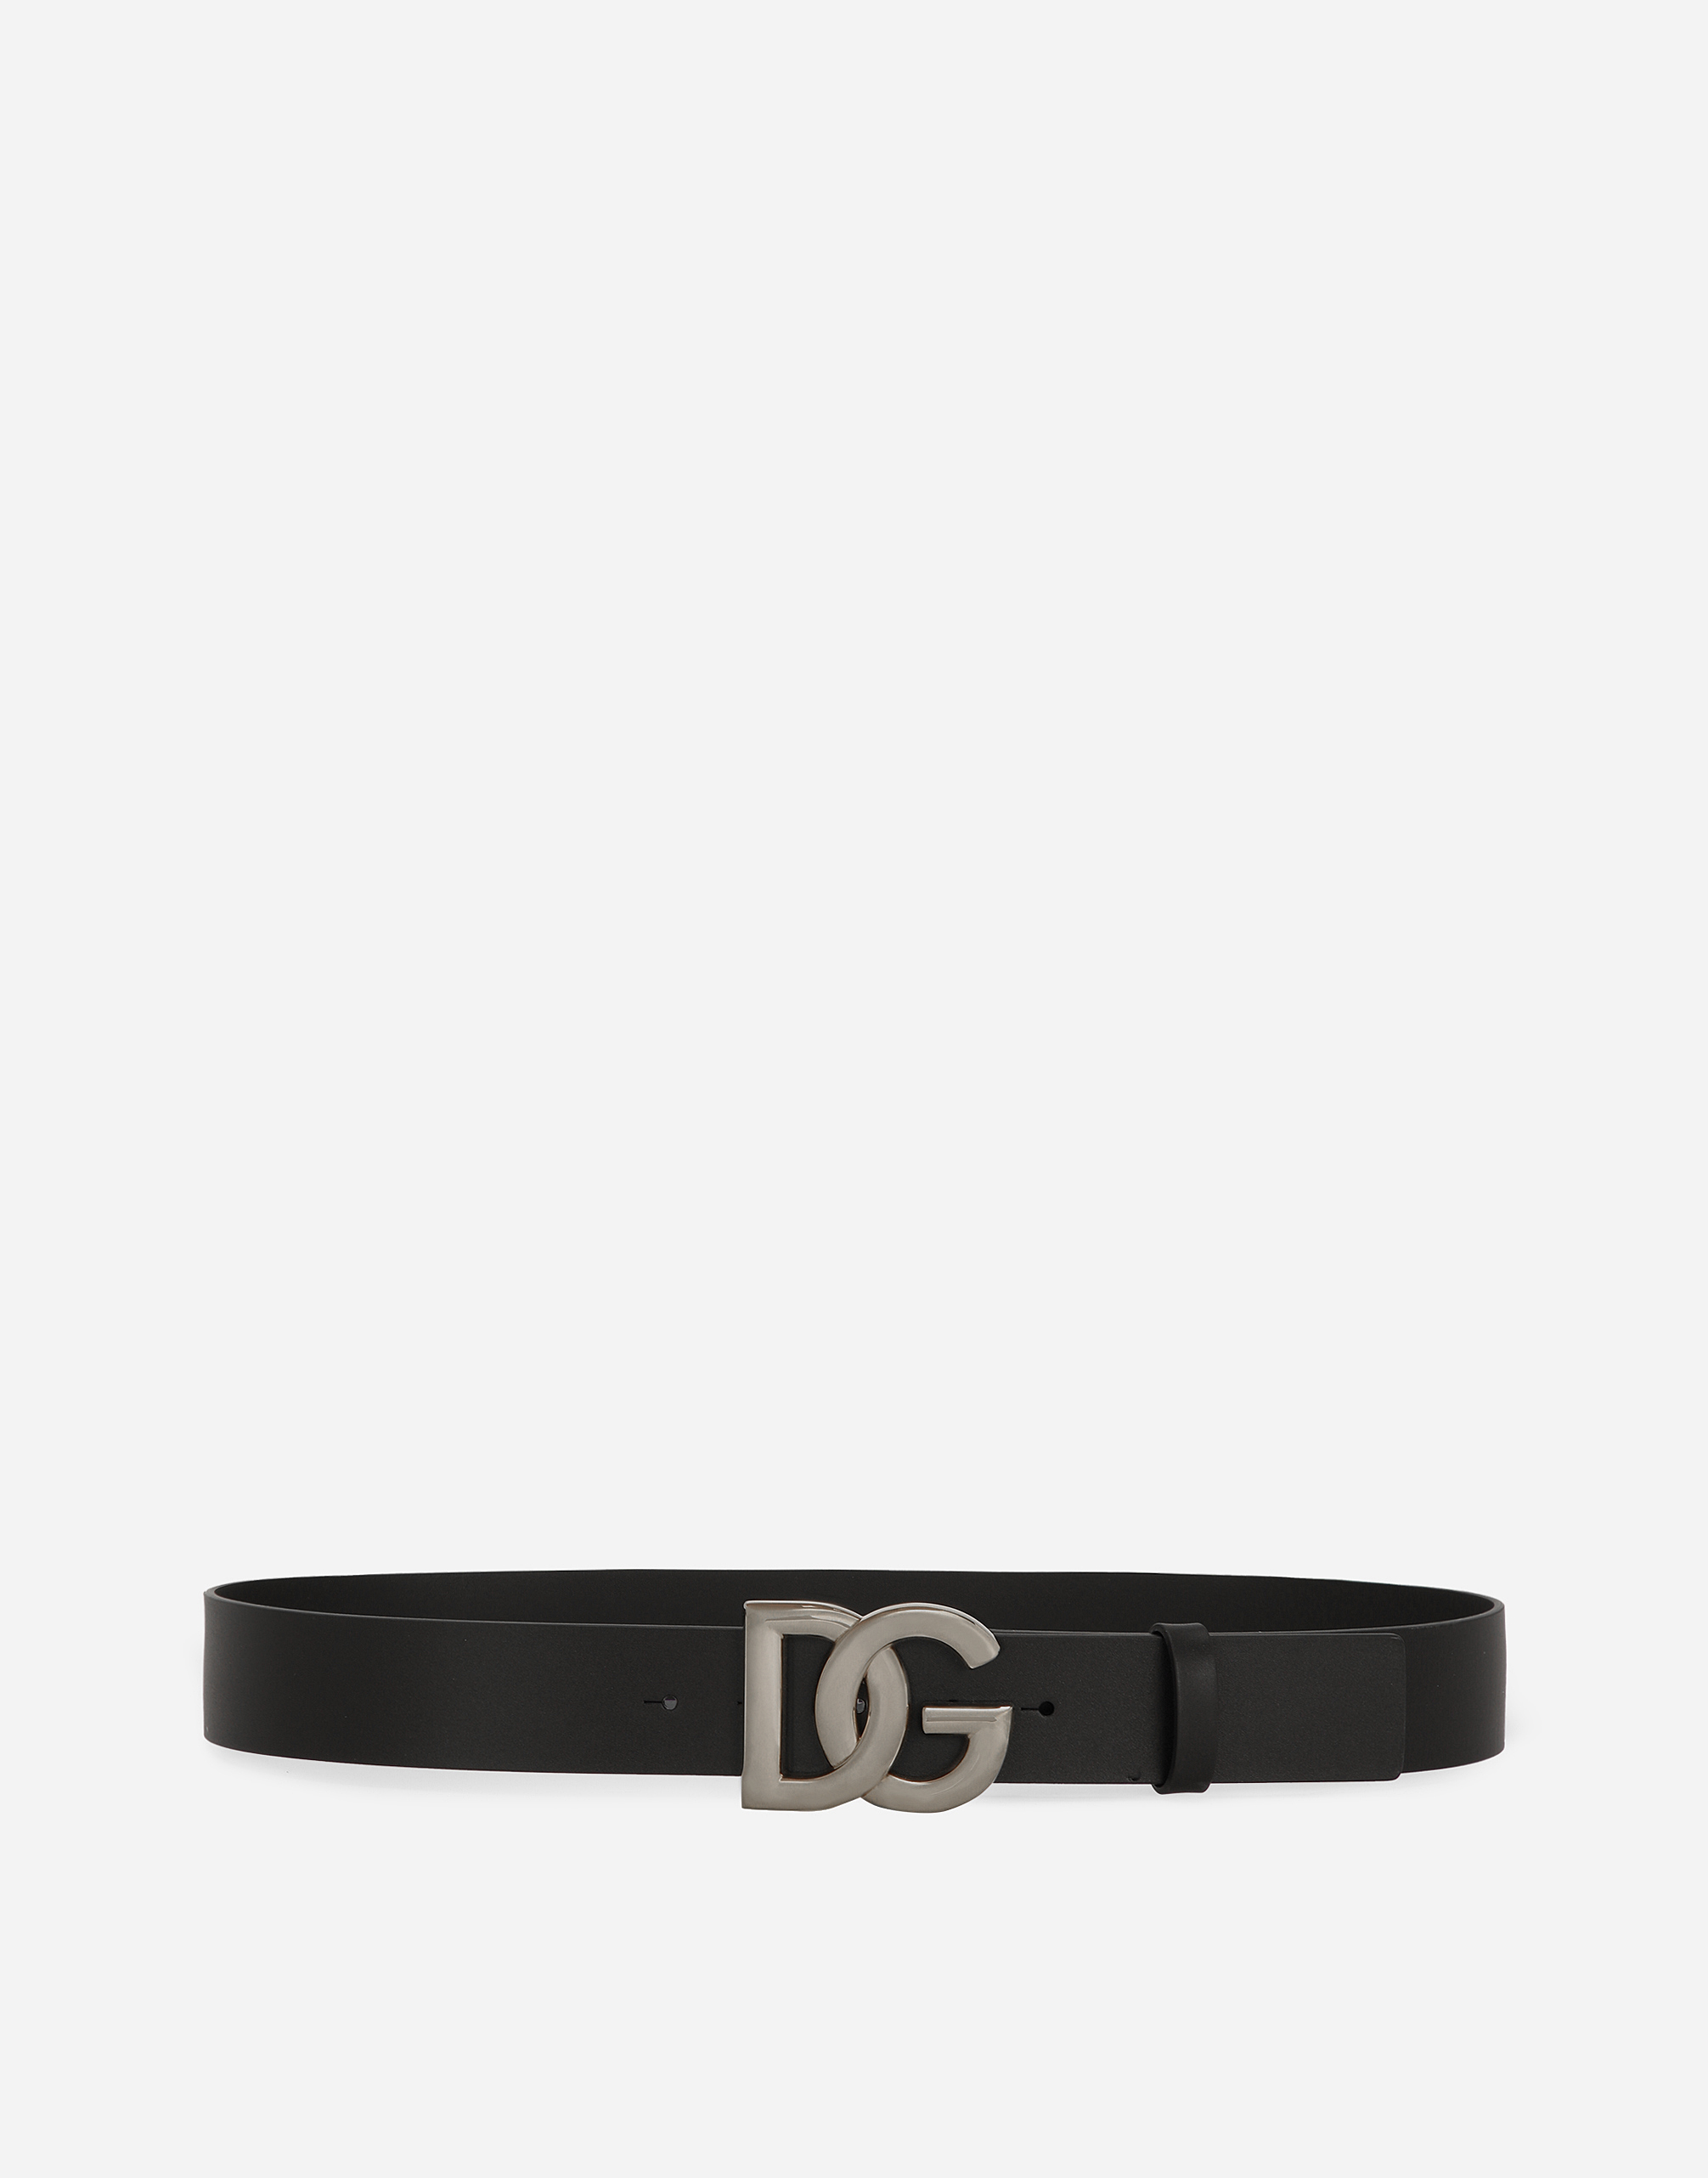 Lux leather belt with crossover DG logo buckle in Black